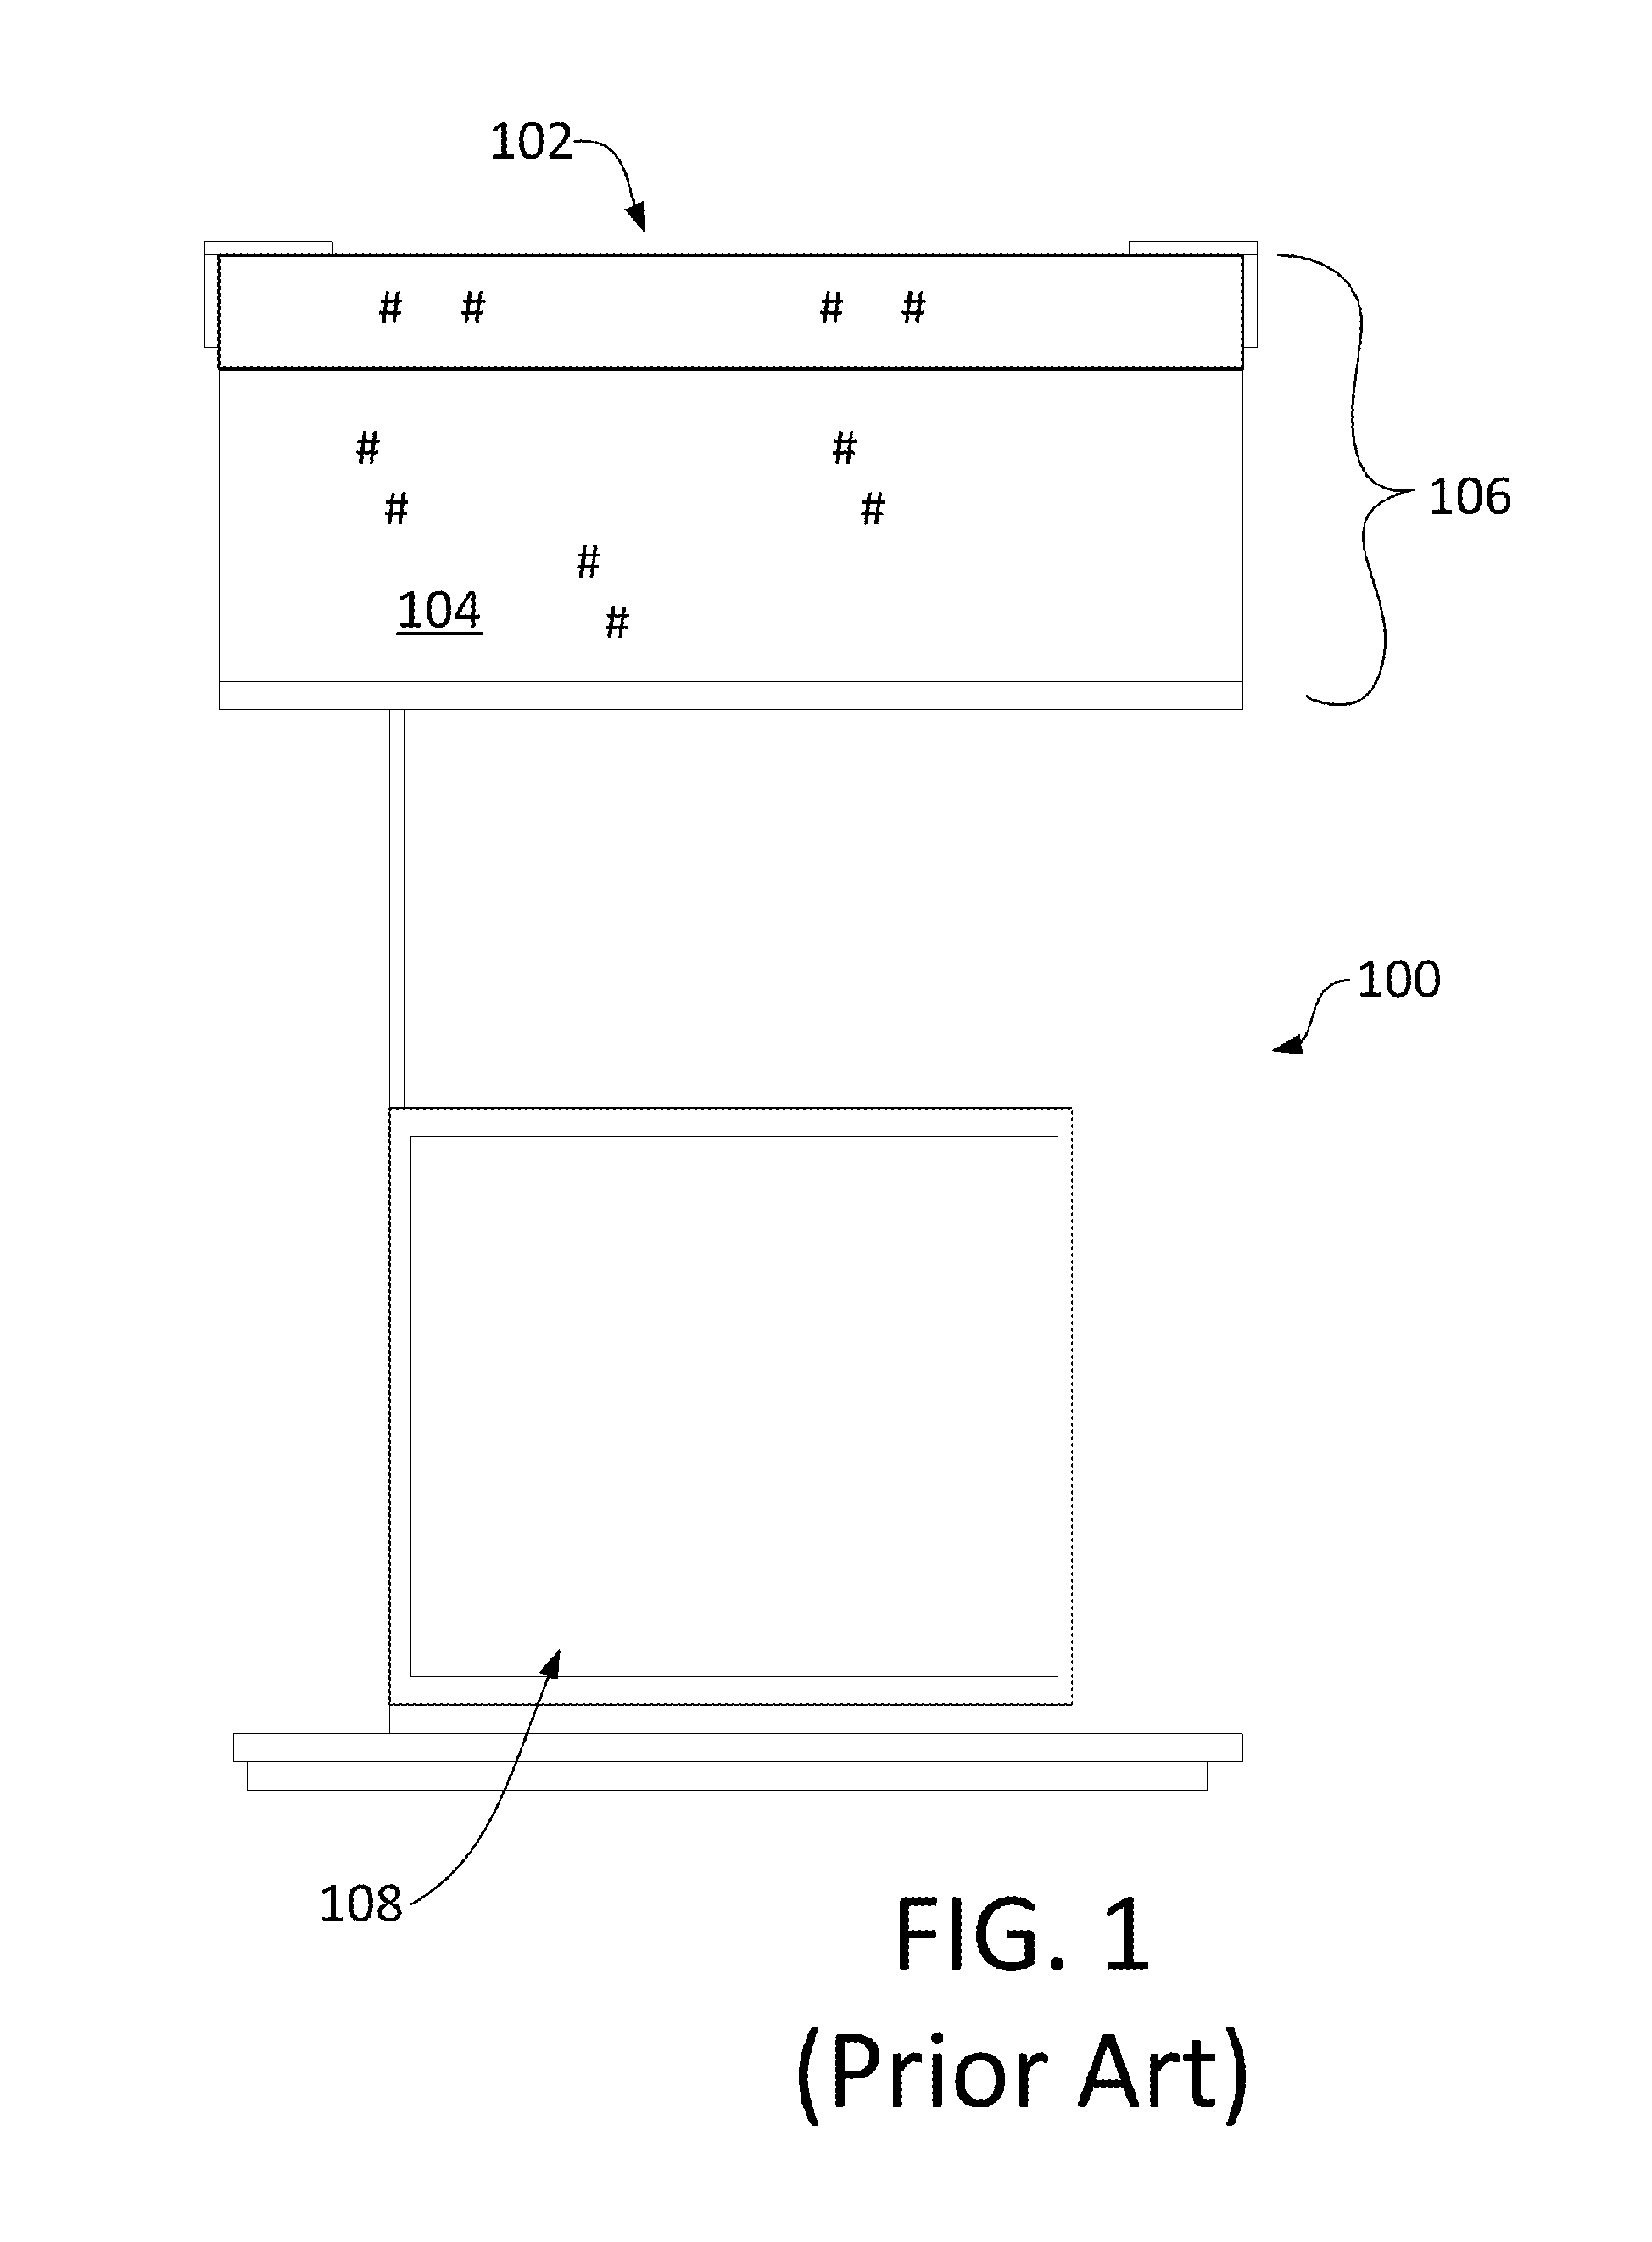 Shading Control Network Using a Control Network